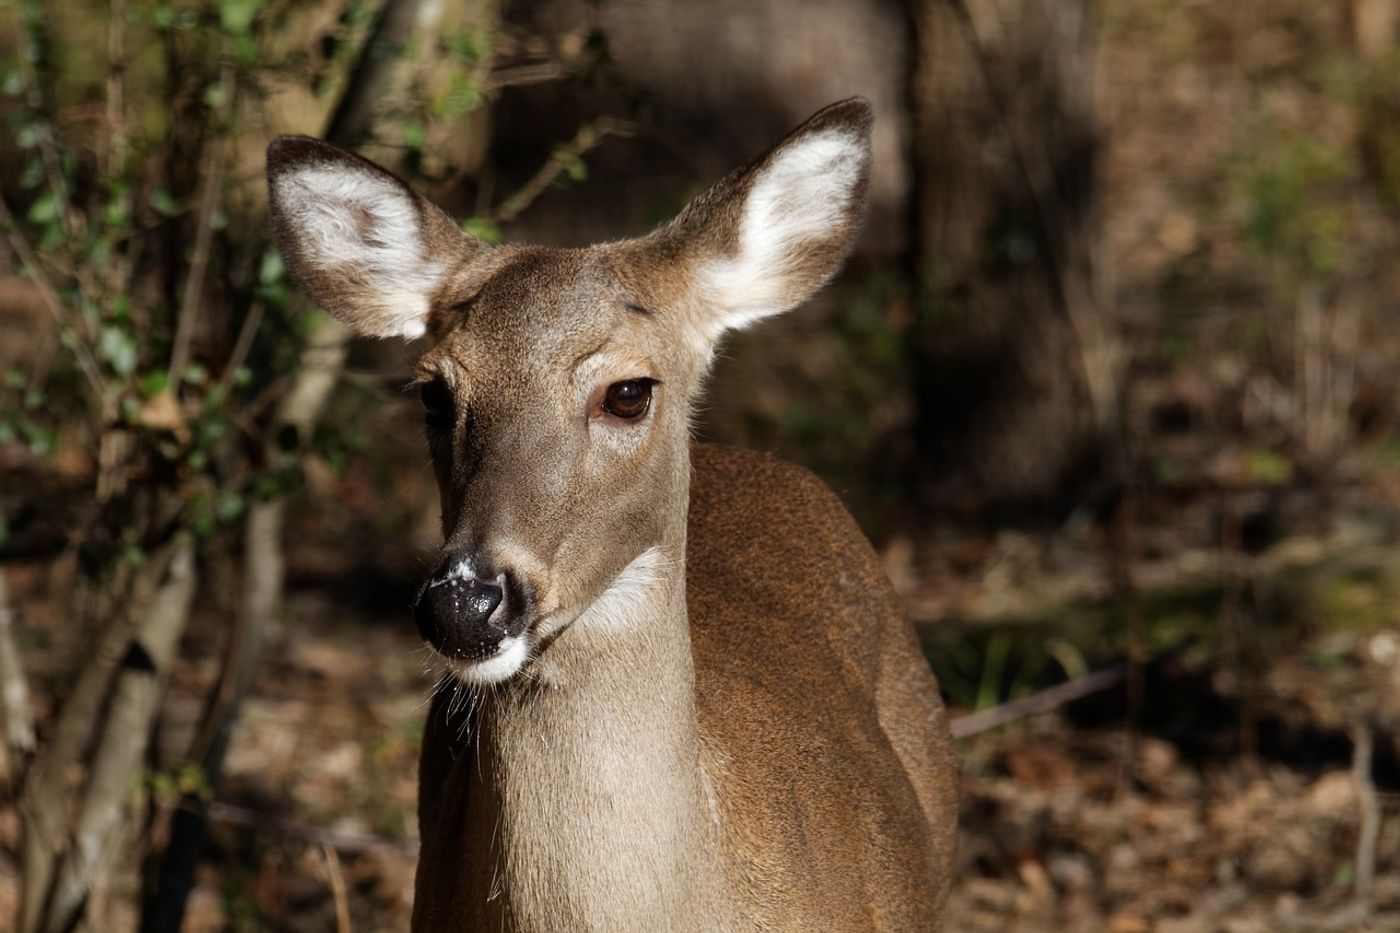 White-tailed deer typically stick to an herbivorous diet, but sometimes they go off looking for other minerals to munch on.